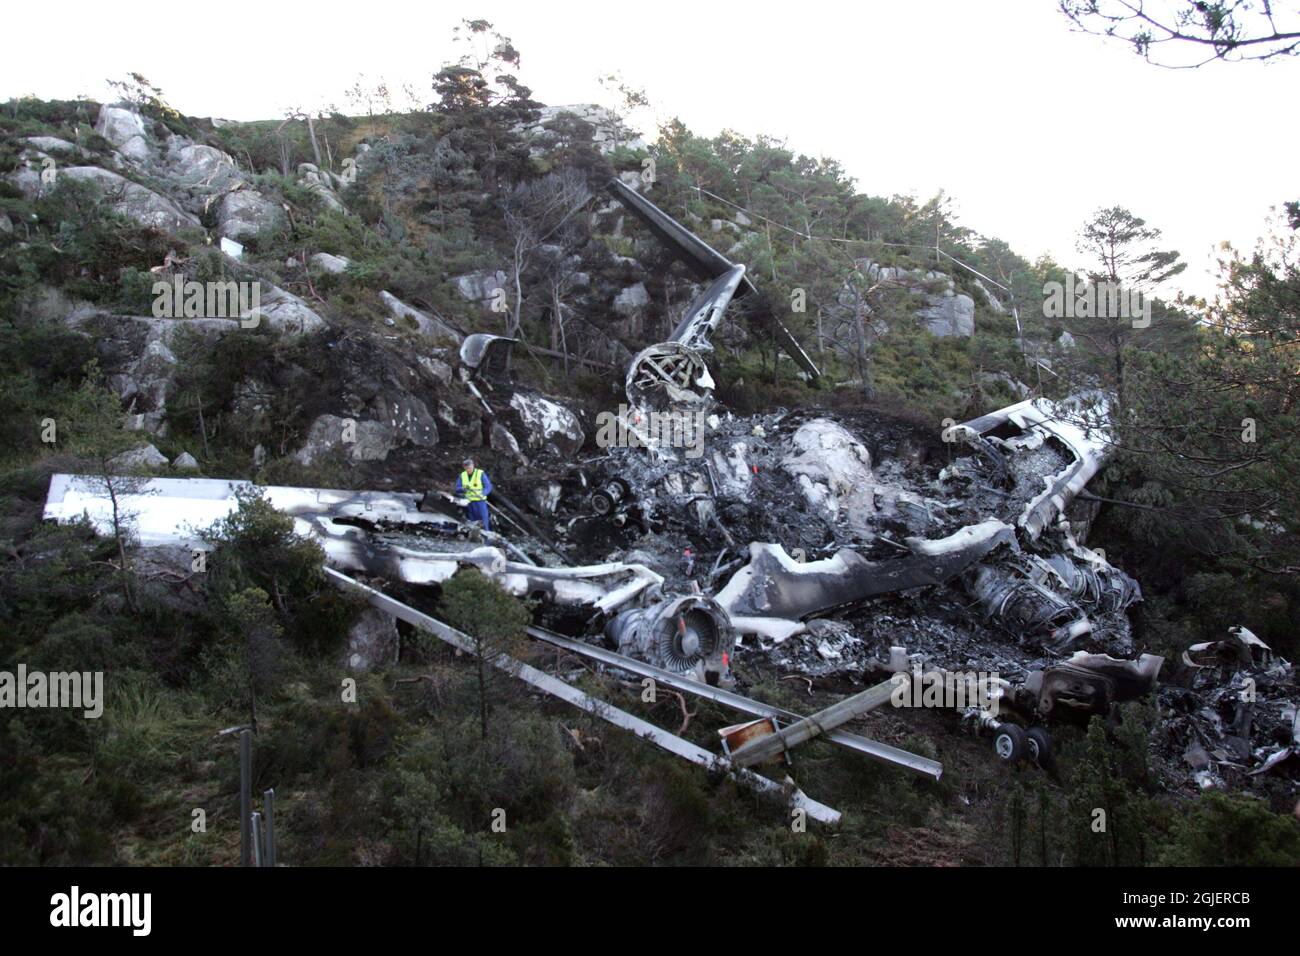 The wreckage of the commuter flight carrying 16 passengers that crashed during landing at the Stord airport in Norway, October 11, 2006. Four passengers died at the accident Stock Photo